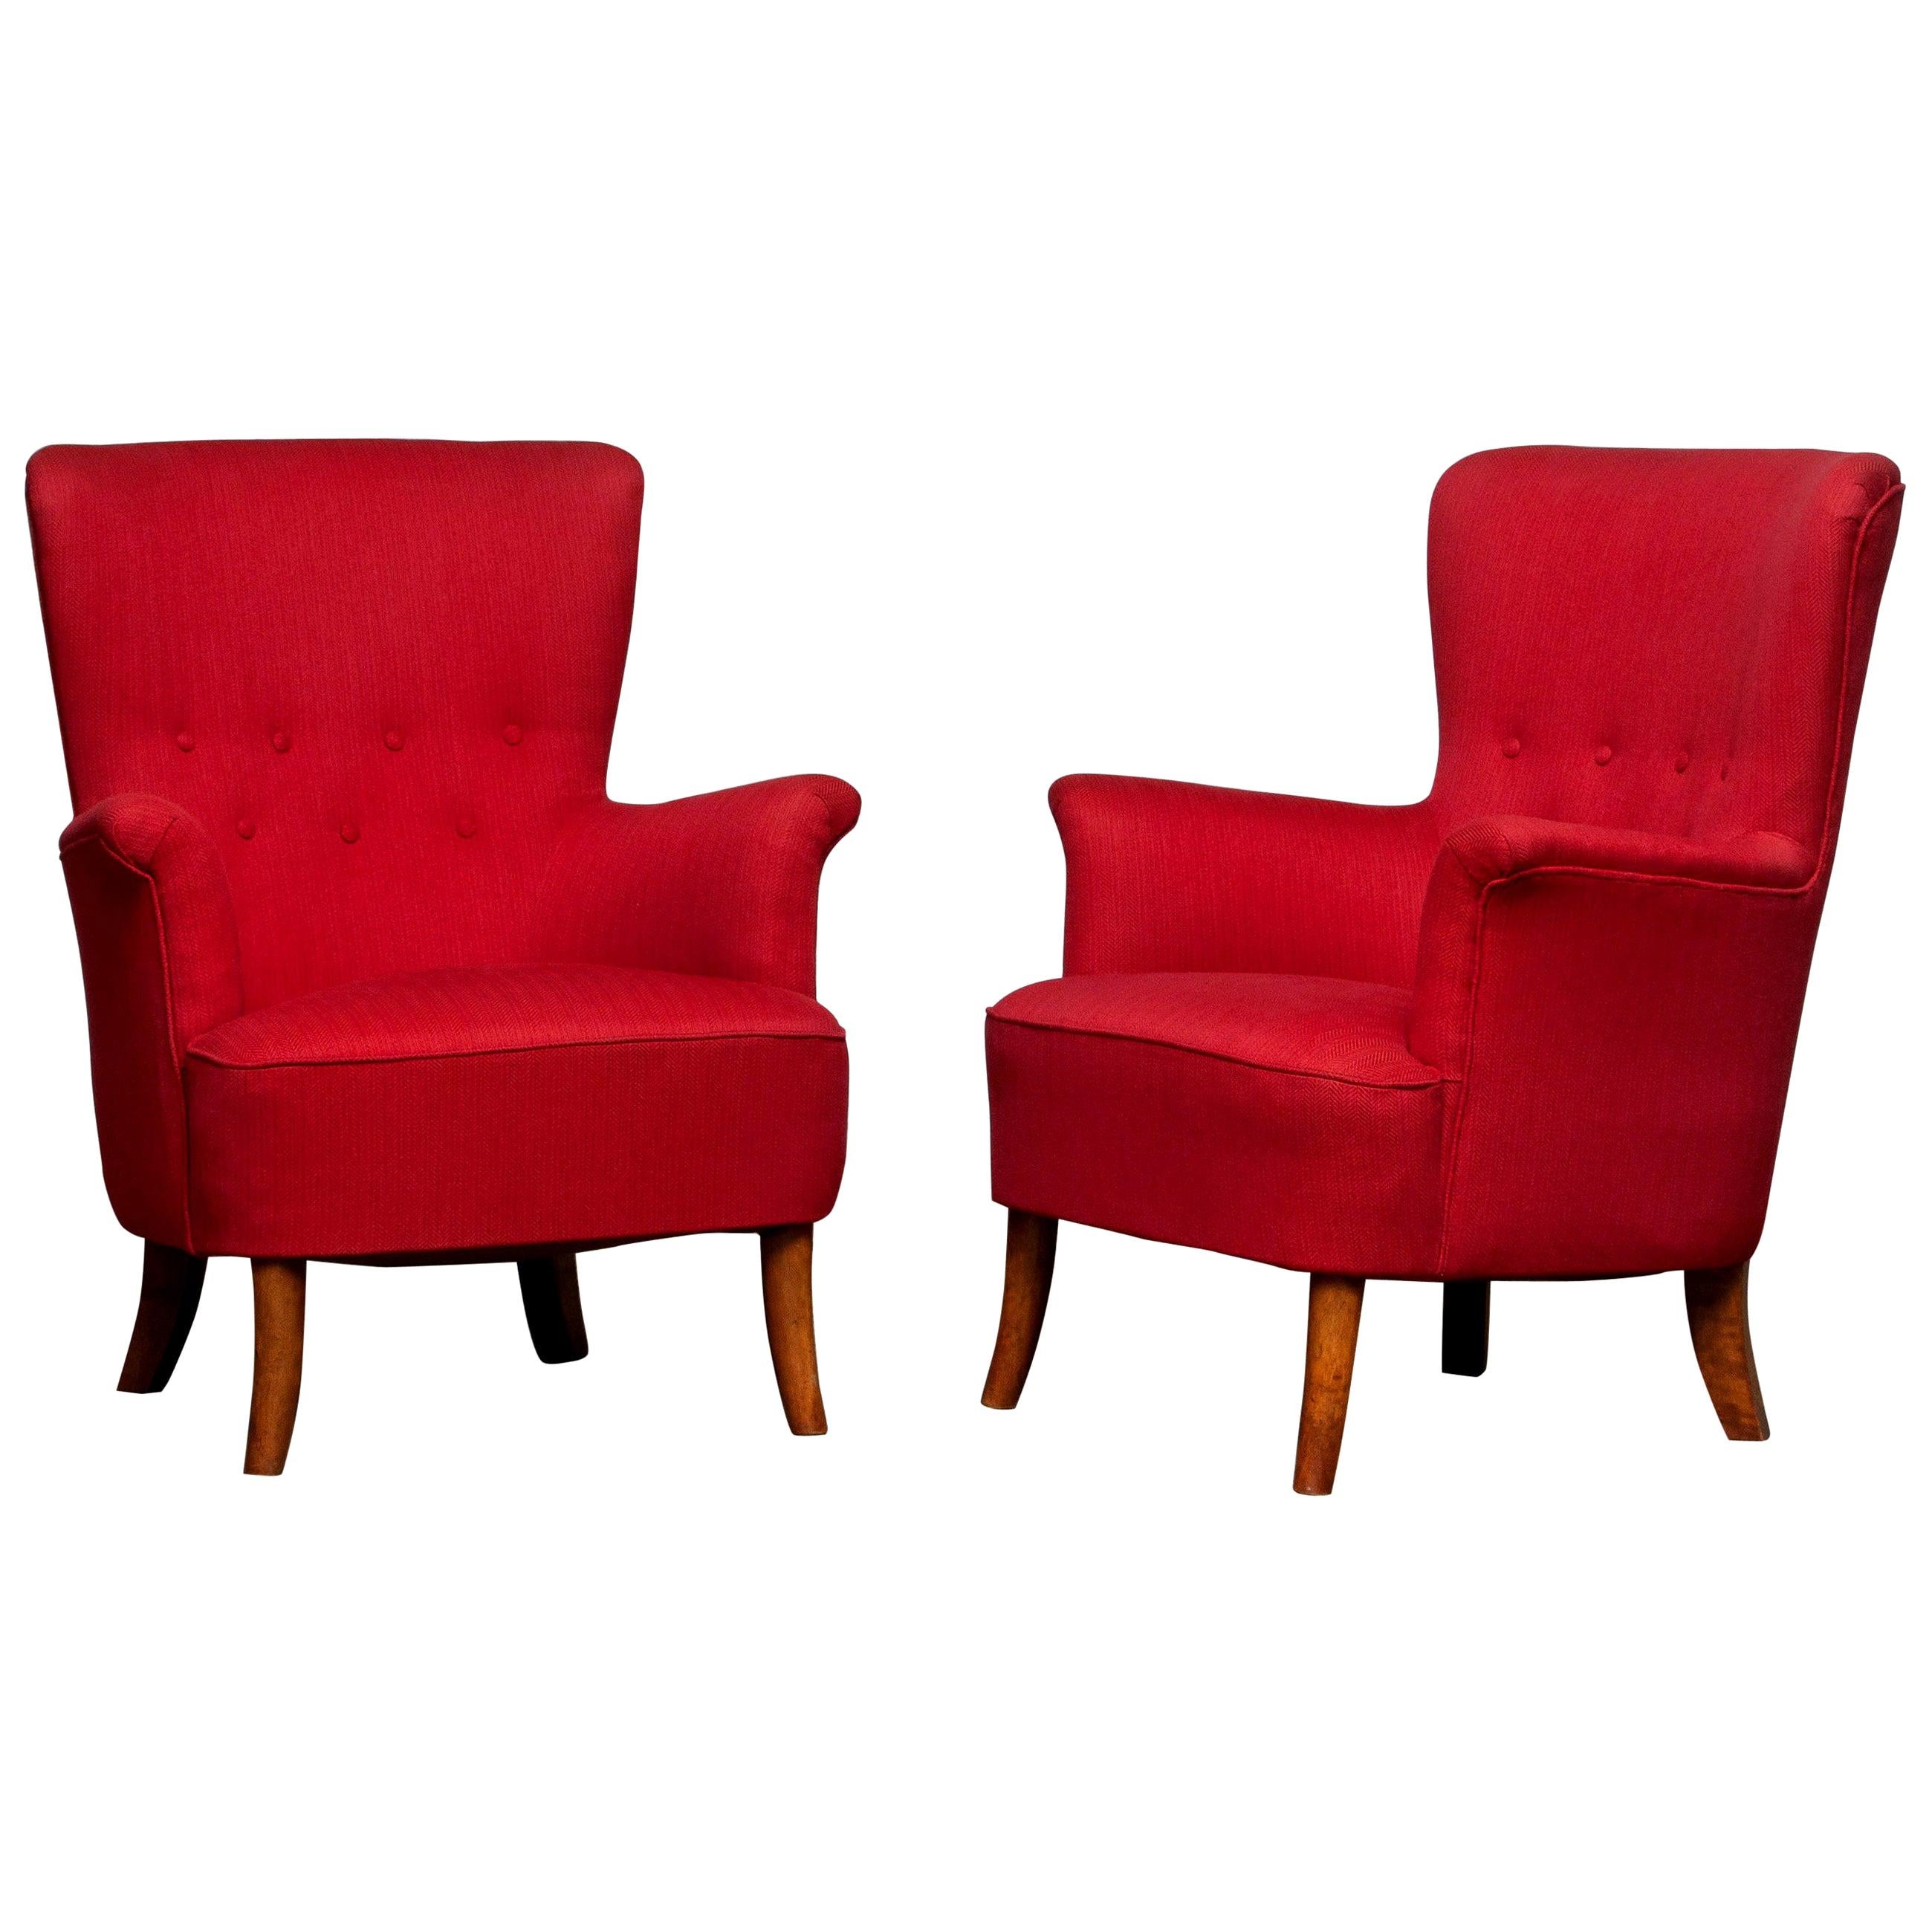 Beautiful set of two fuchsia / red easy / lounge chairs designed by Carl Malmsten for OH Sjögren, Sweden. The overall condition is good and clean. Period: 1940-1949.